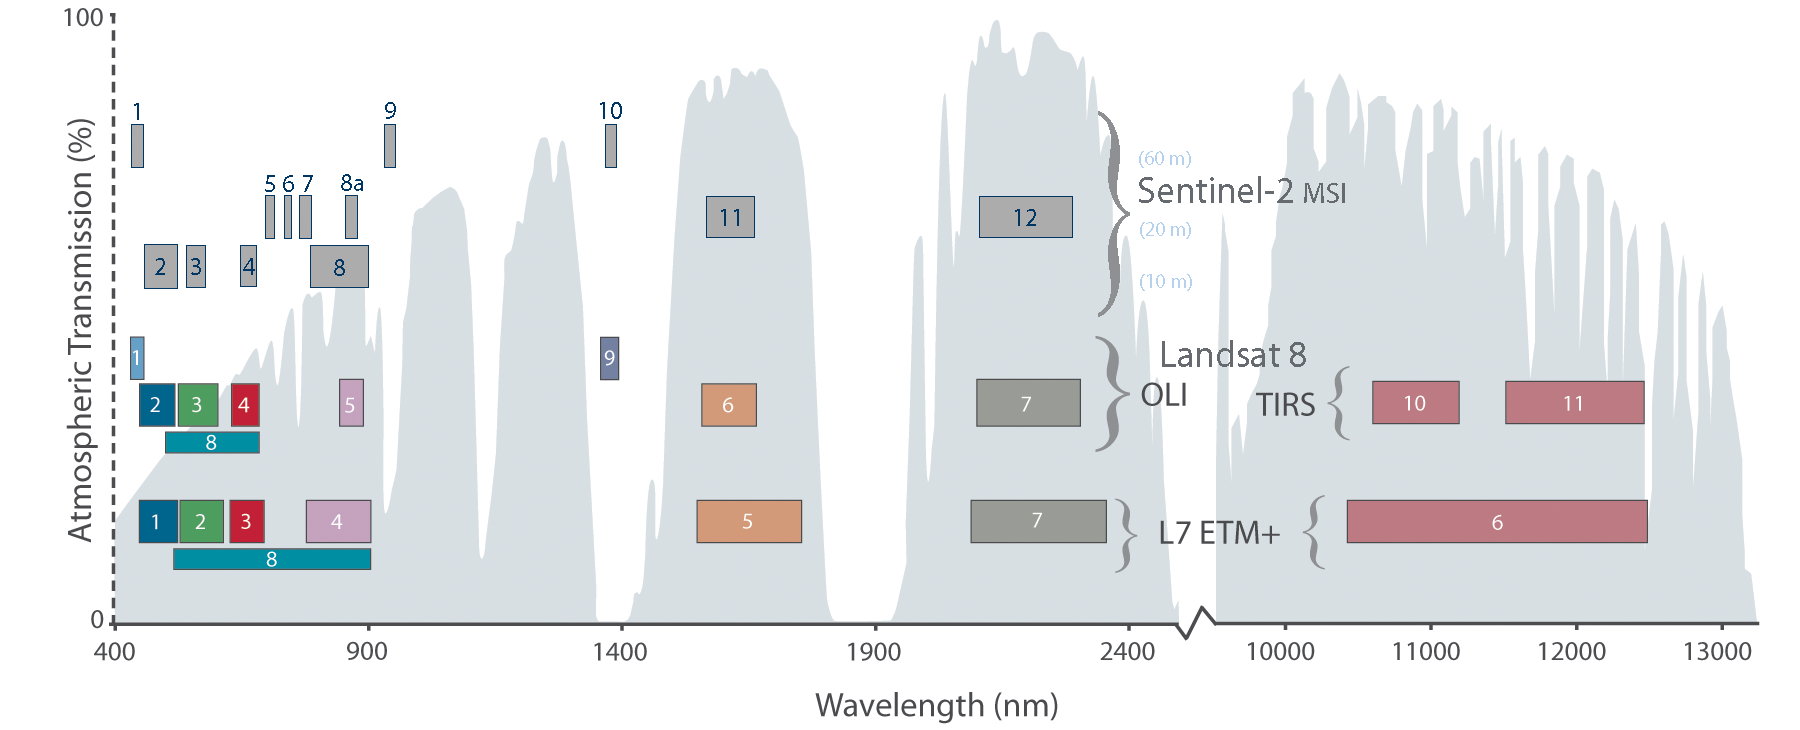 Comparison of Landsat and Sentinel-2 and location of the spectral bands. The numbers indicate the number of spectral bands considered in each sensor [@NASA2021]